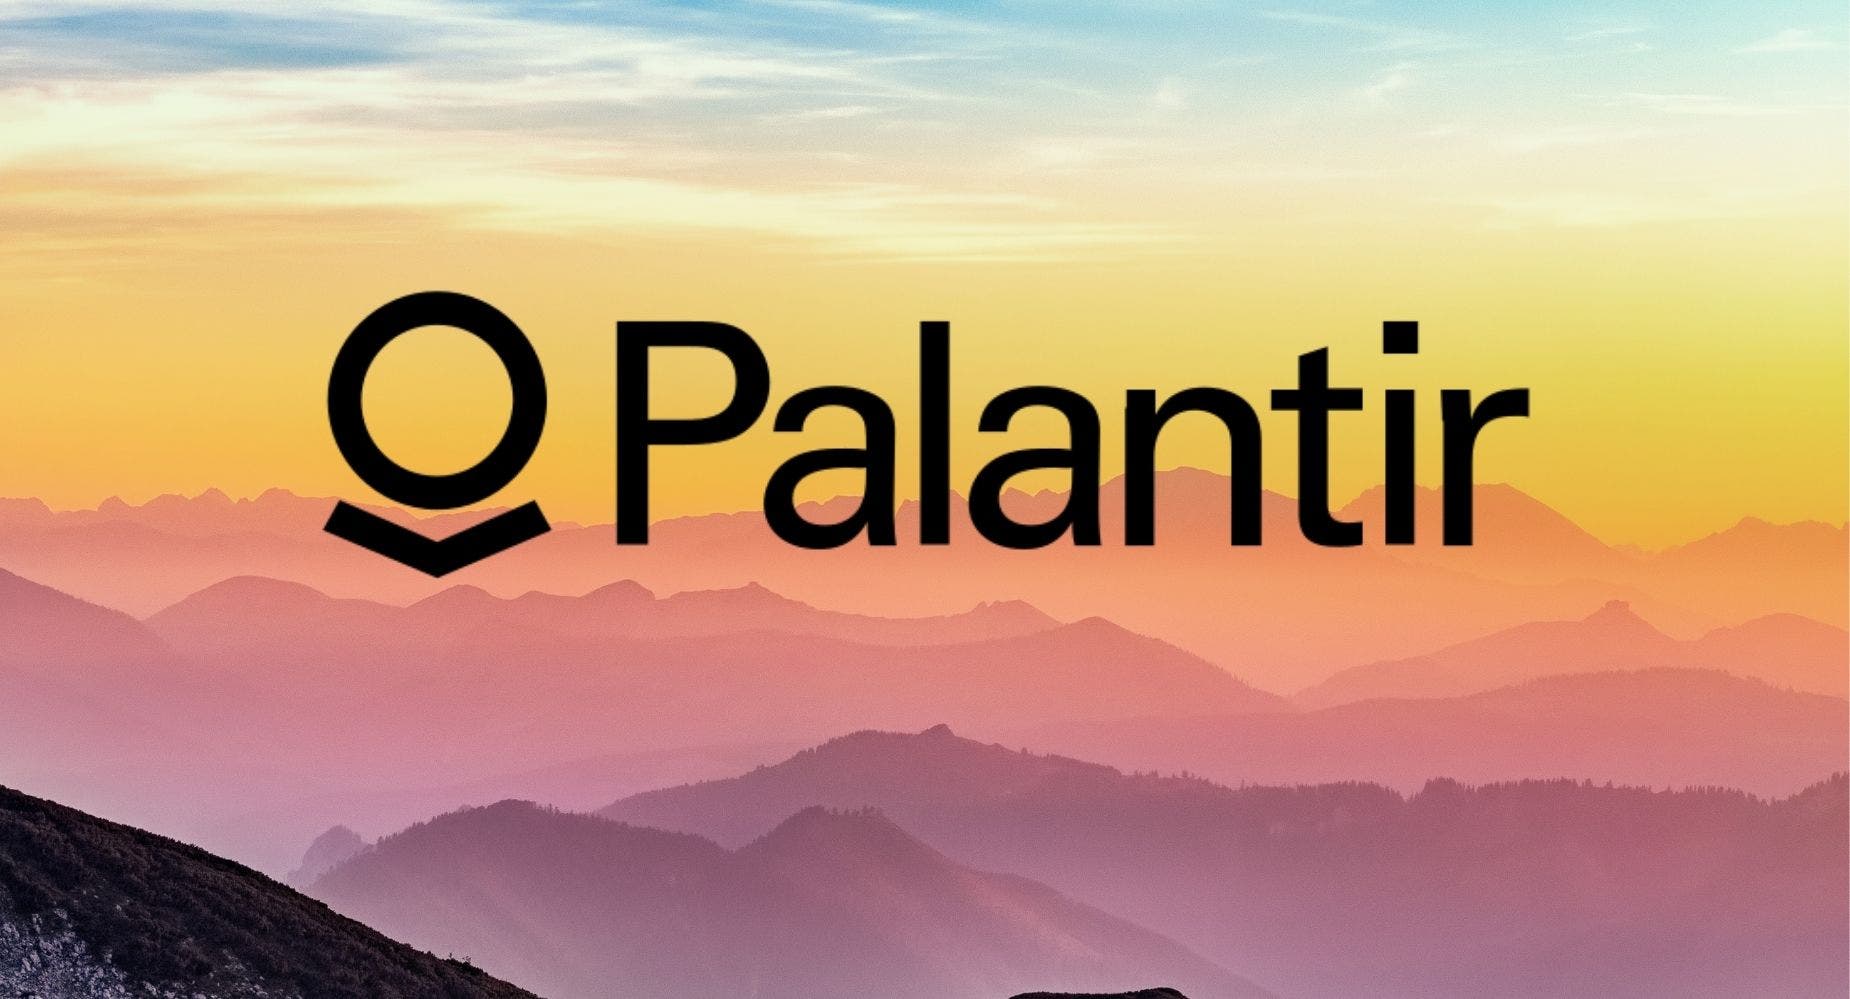 Palantir Bulls Buy The Dip After Disappointing Q2 Earnings: What's Next?